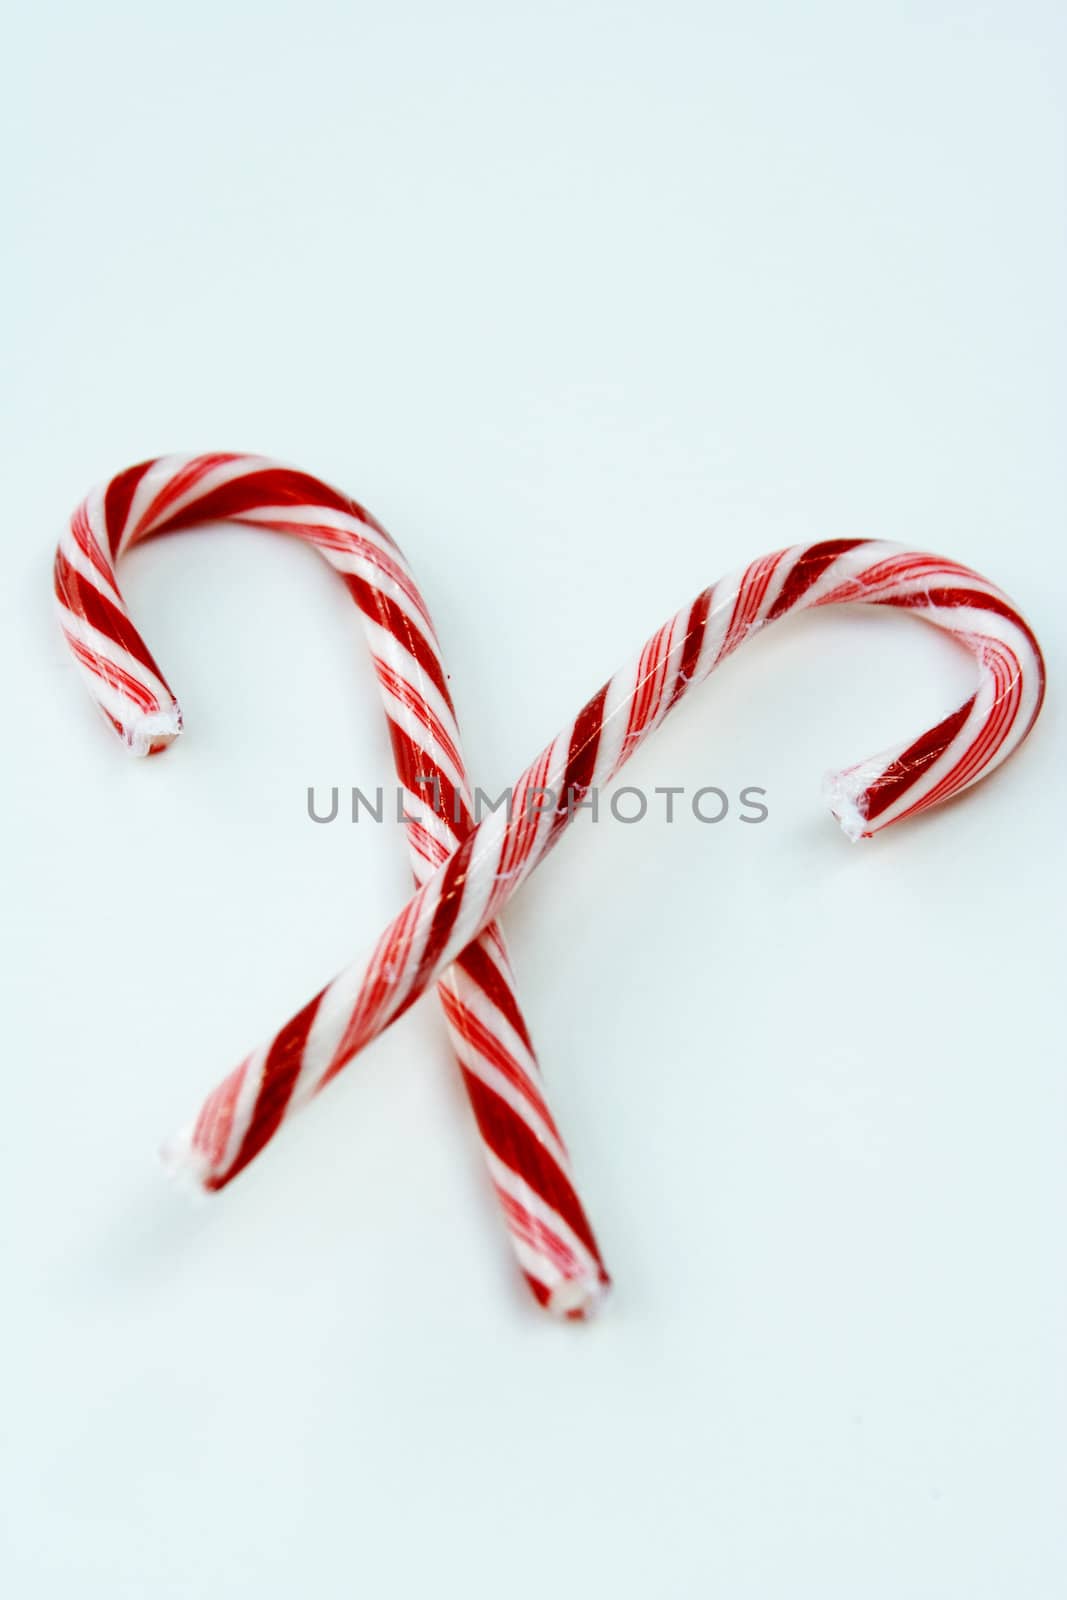 Candy canes by snokid